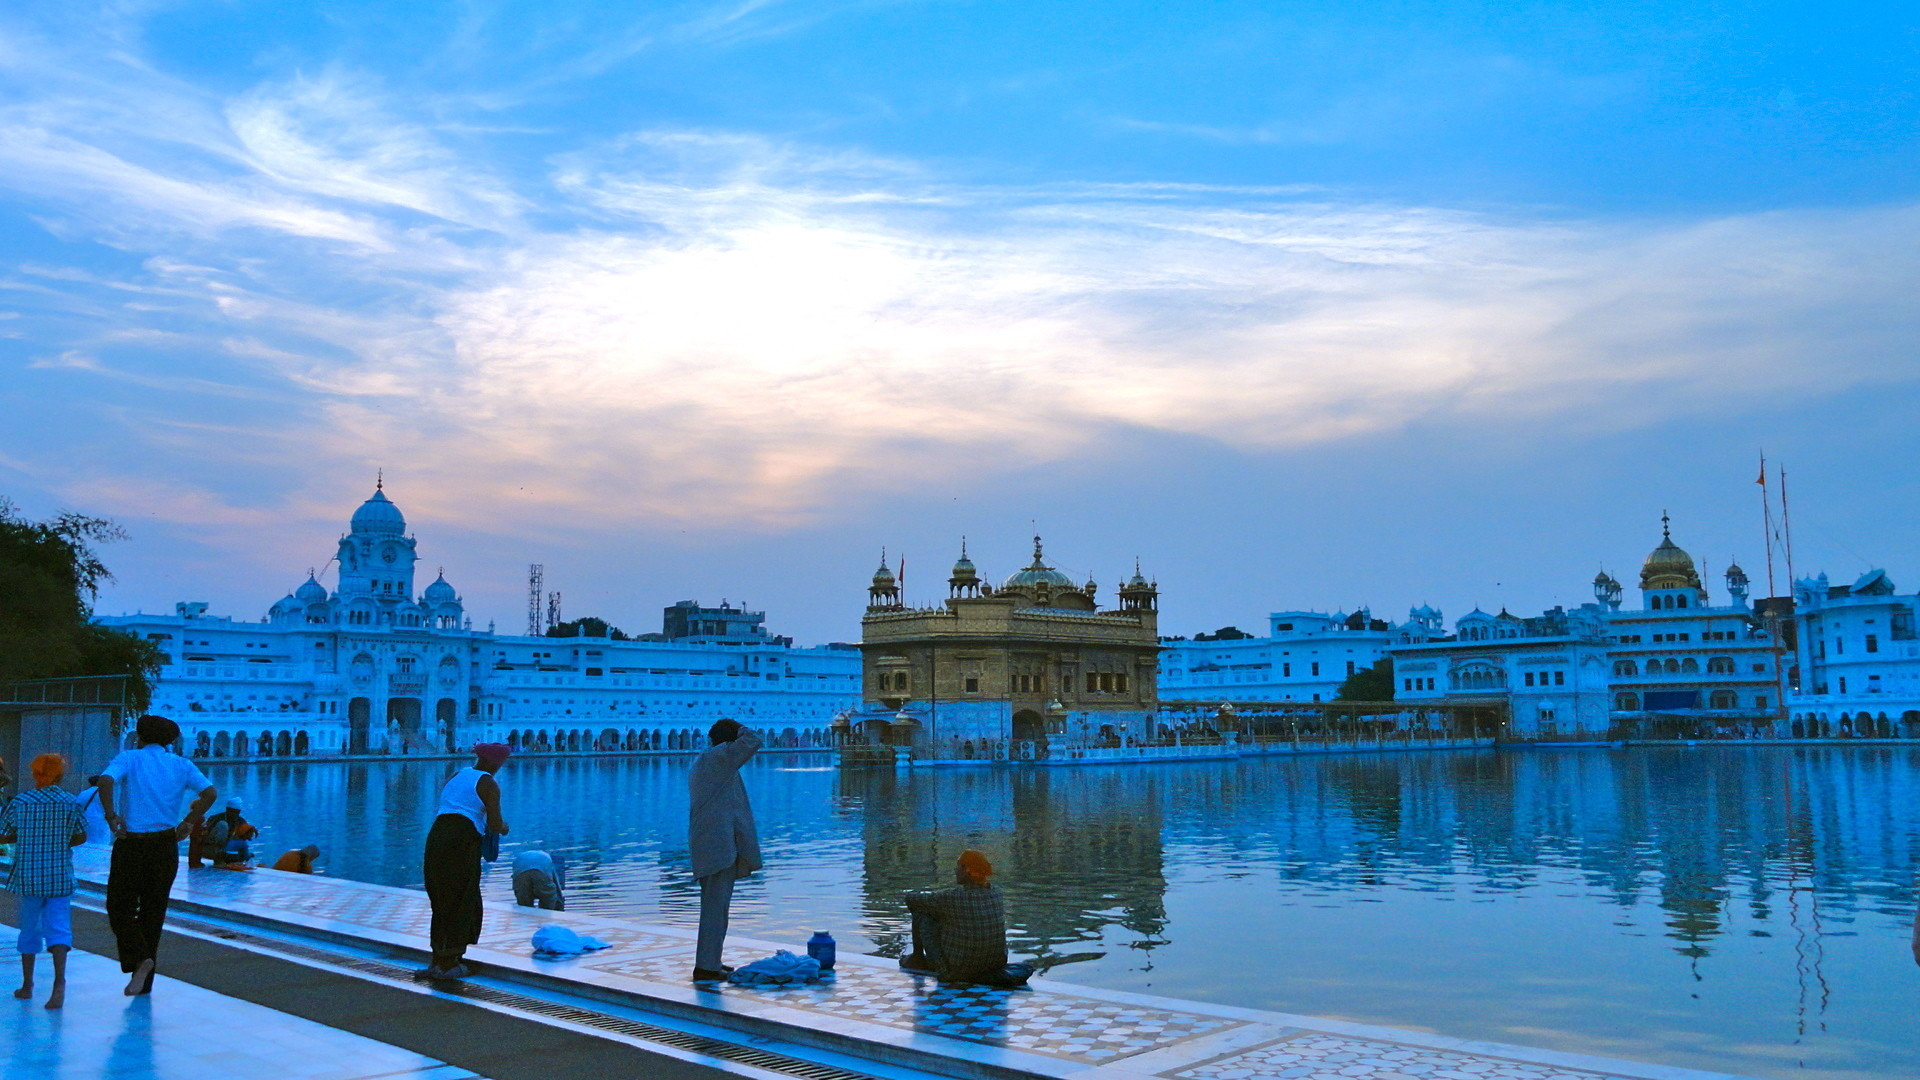 Guru Nanak Founded Sikhism In The 15th Century - Golden Temple - HD Wallpaper 